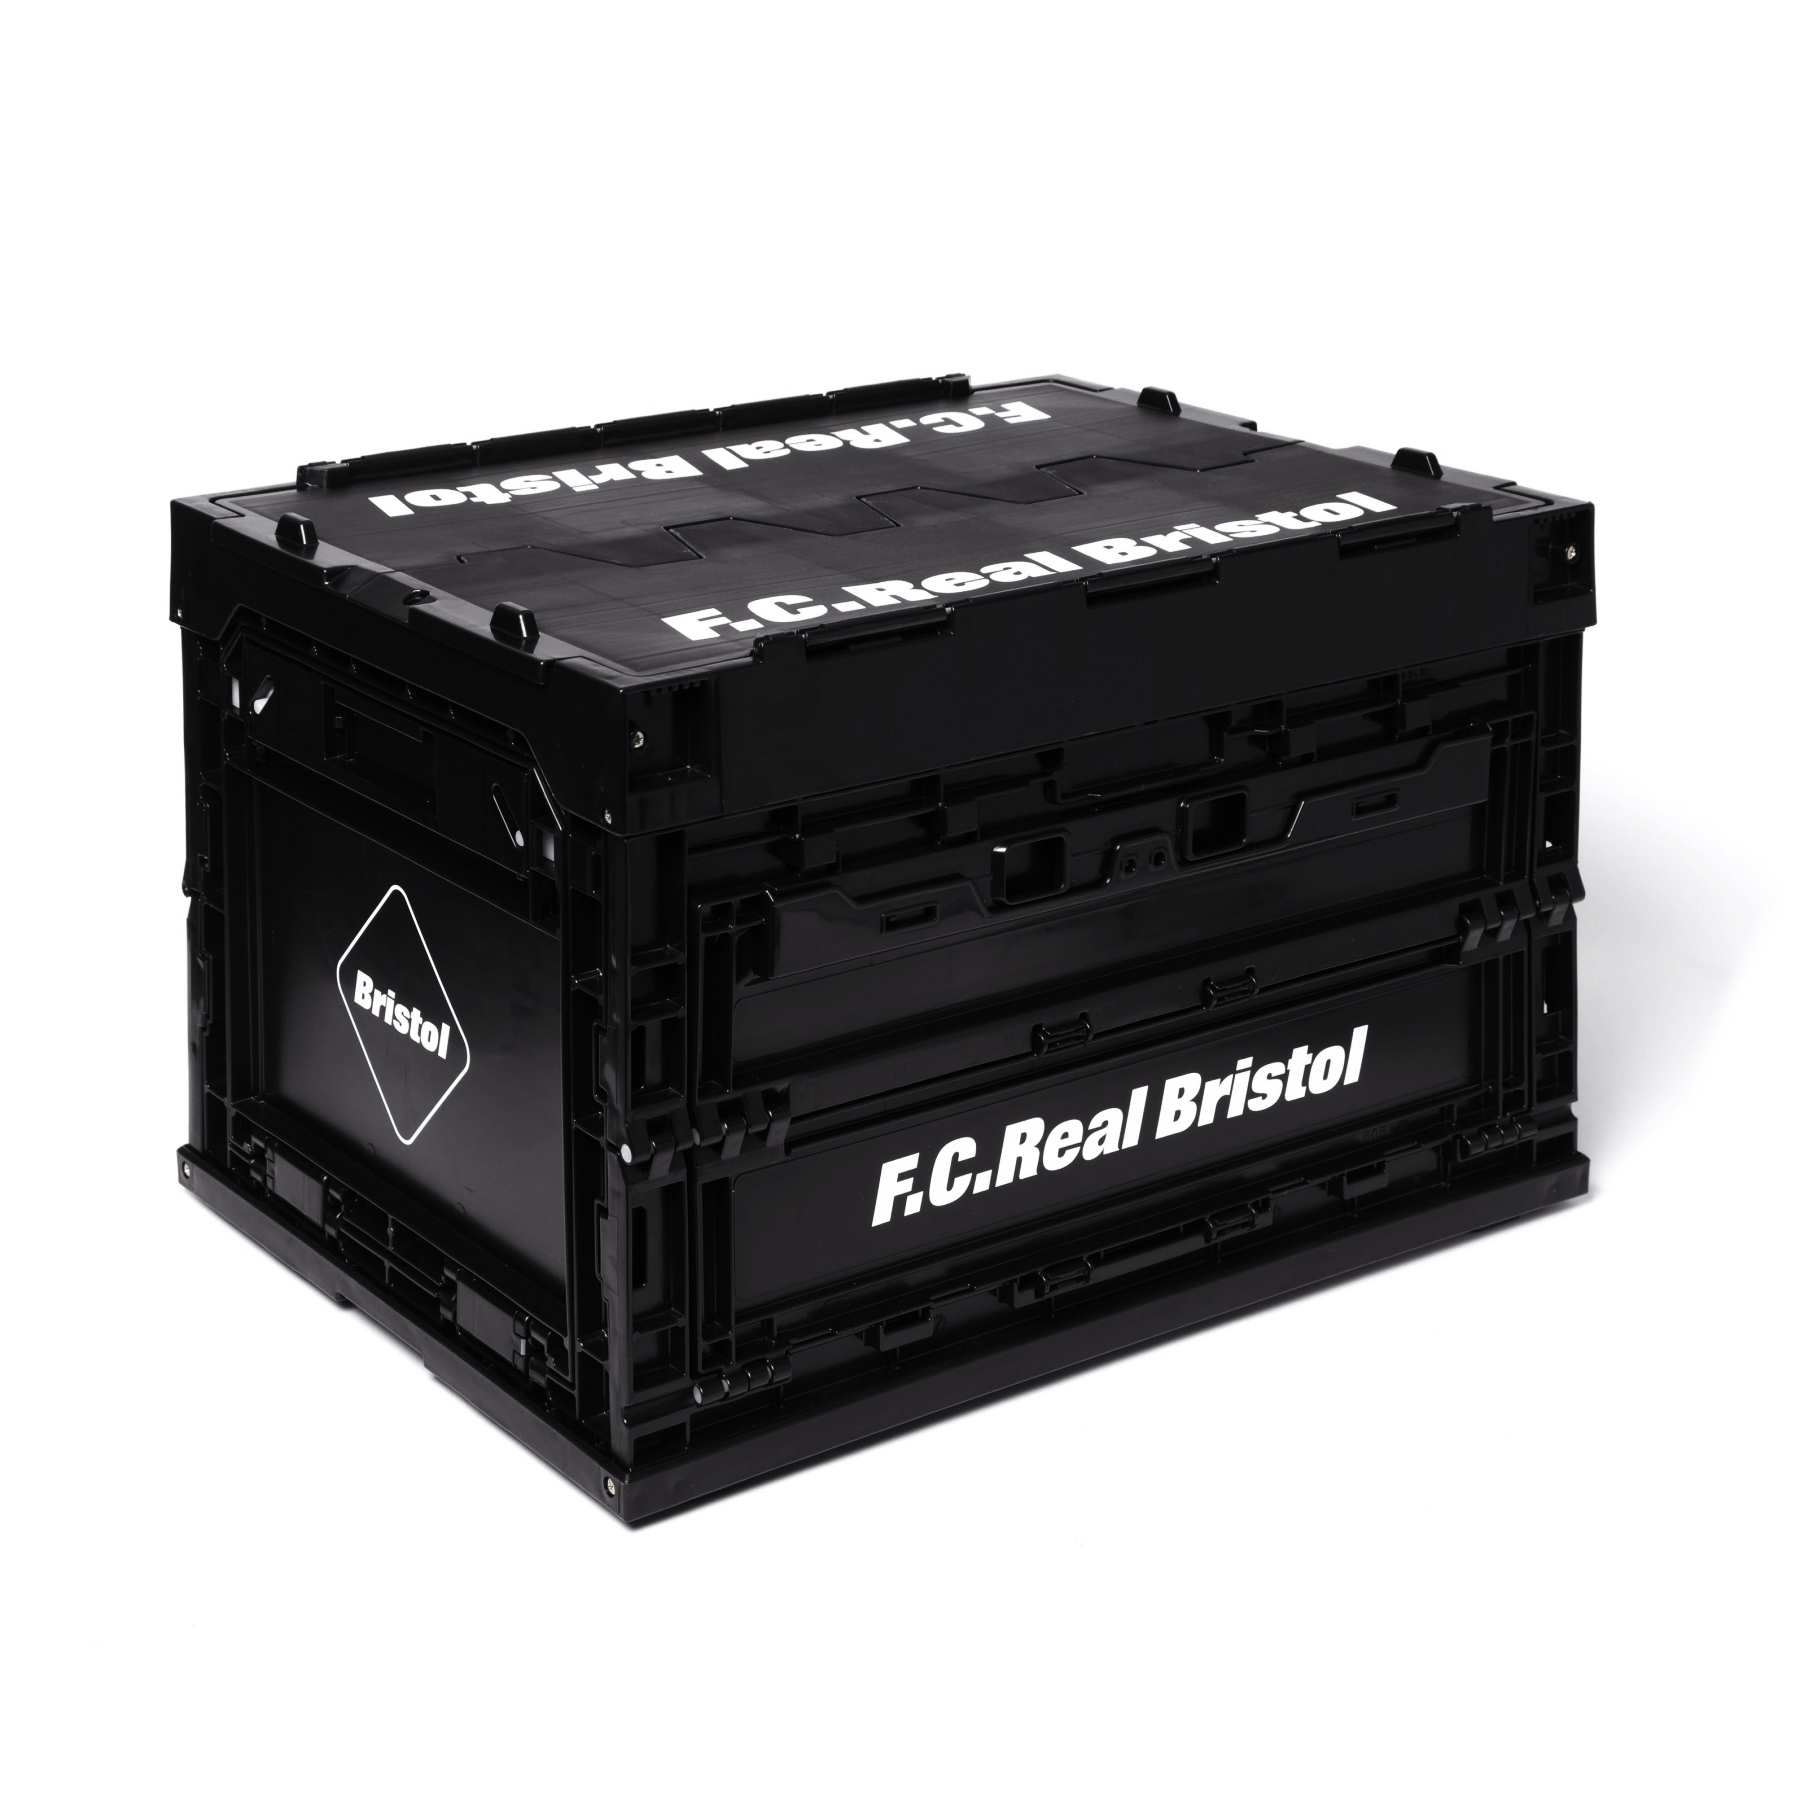 F.C.Real Bristol FCRB FOLDABLE CONTAINER 折疊箱50L 現貨